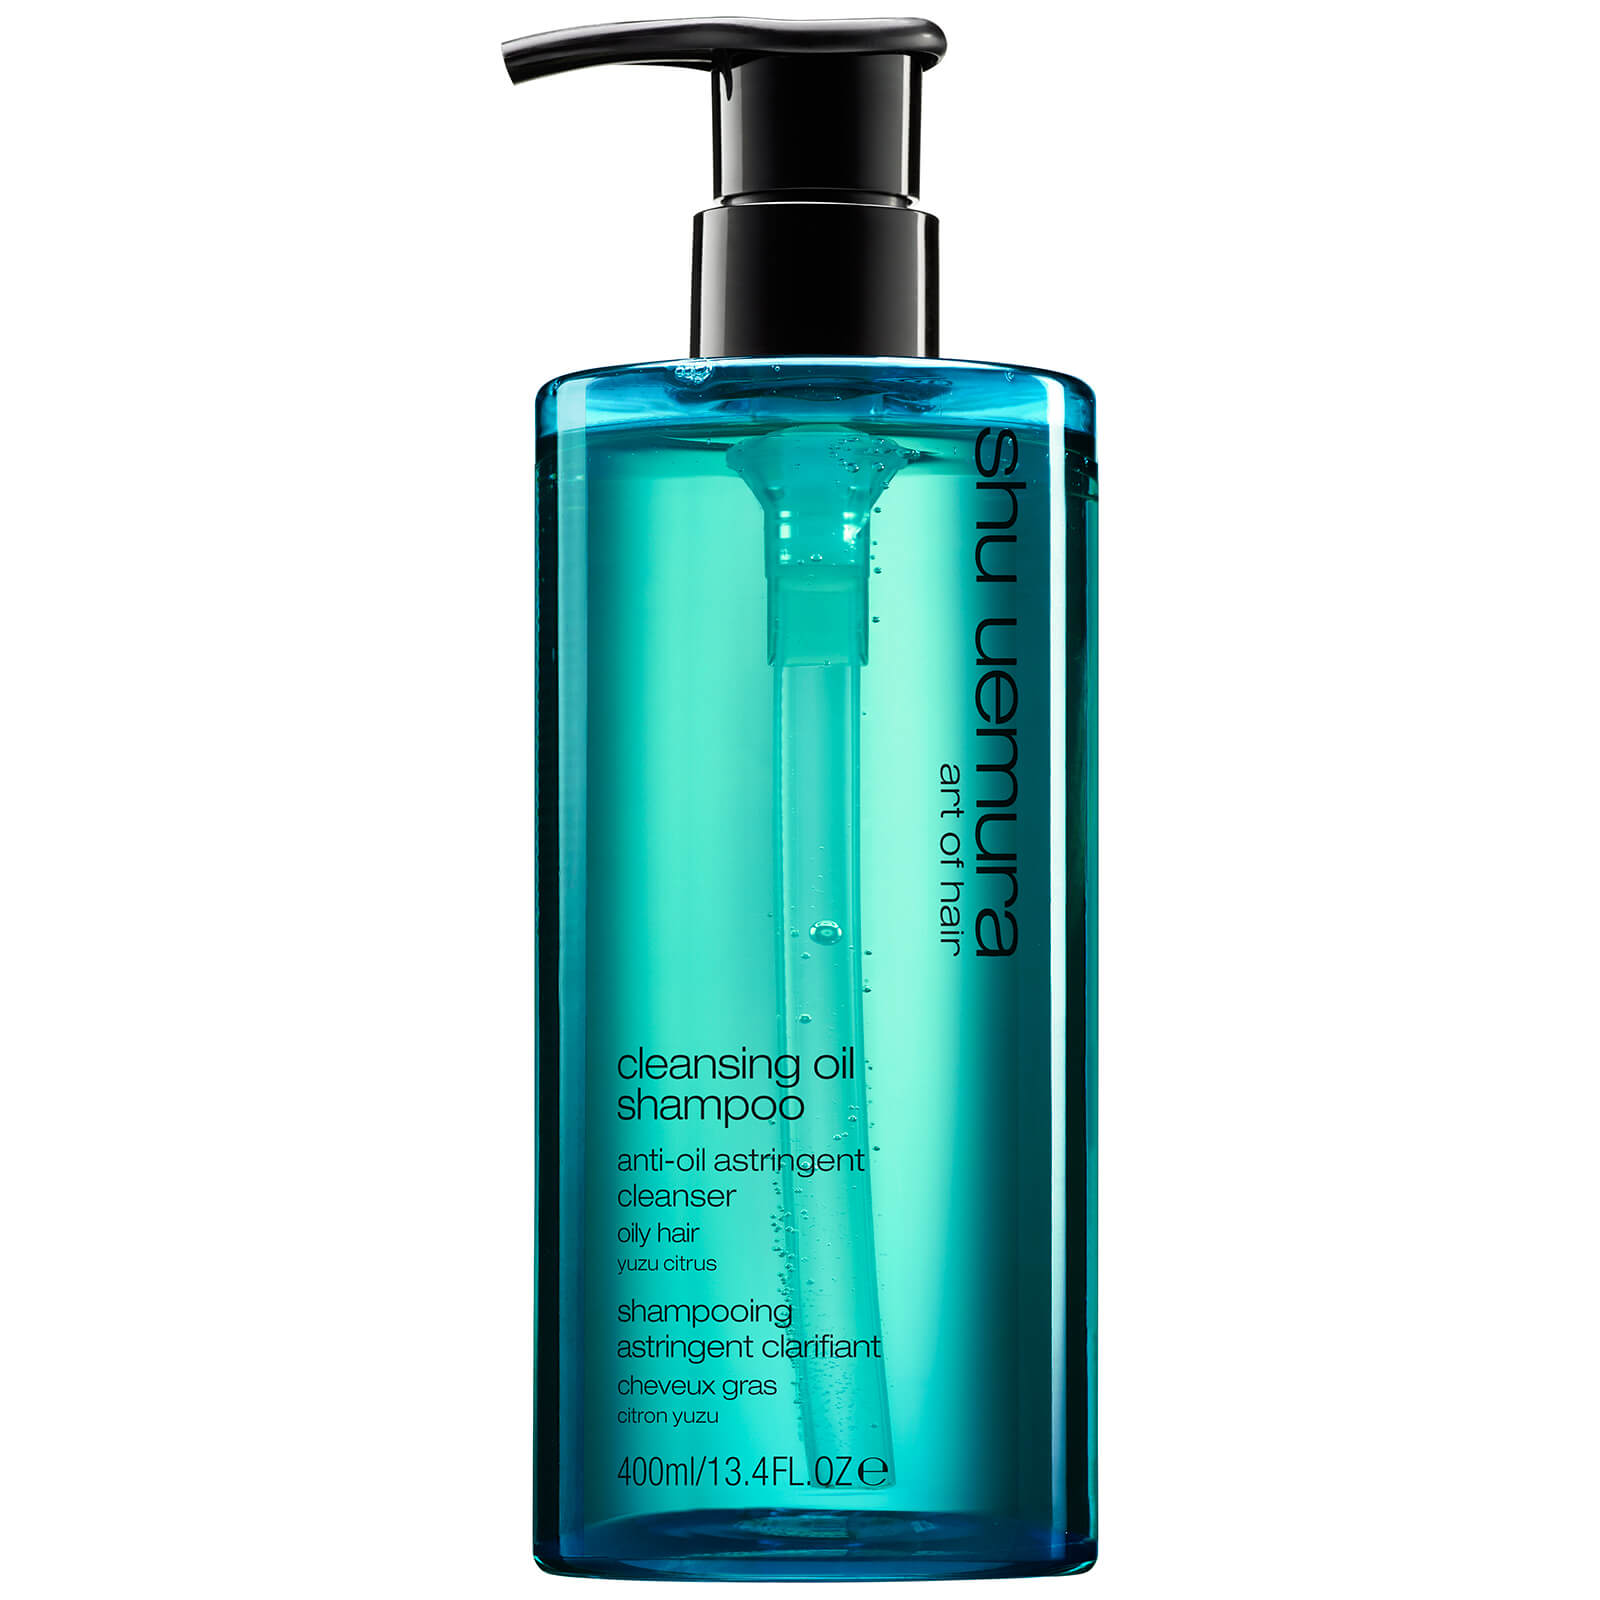 Shampooing astringent clarifiant Cleansing Oil